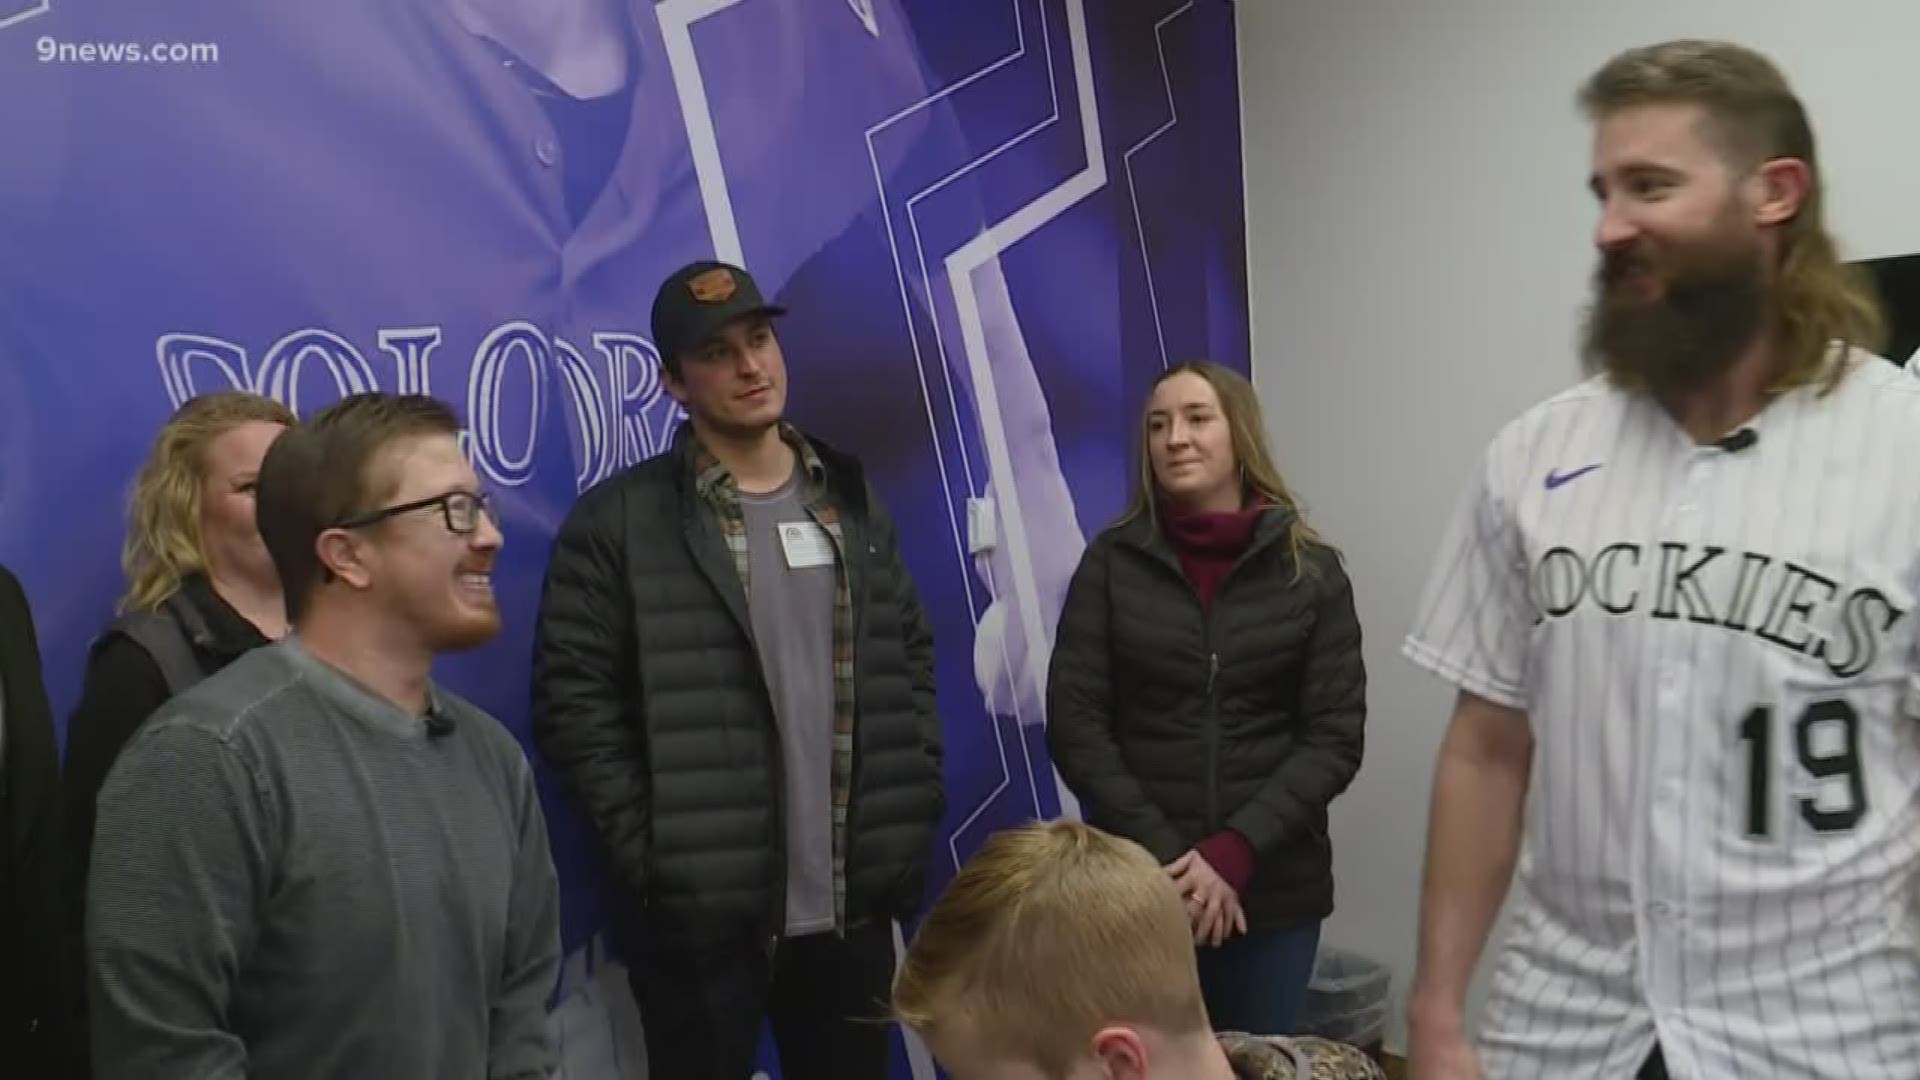 Joseph Garcia just found out he needs a second heart transplant. UCHealth and the Rockies wanted to brighten his spirits with a little help from Charlie Blackmon.